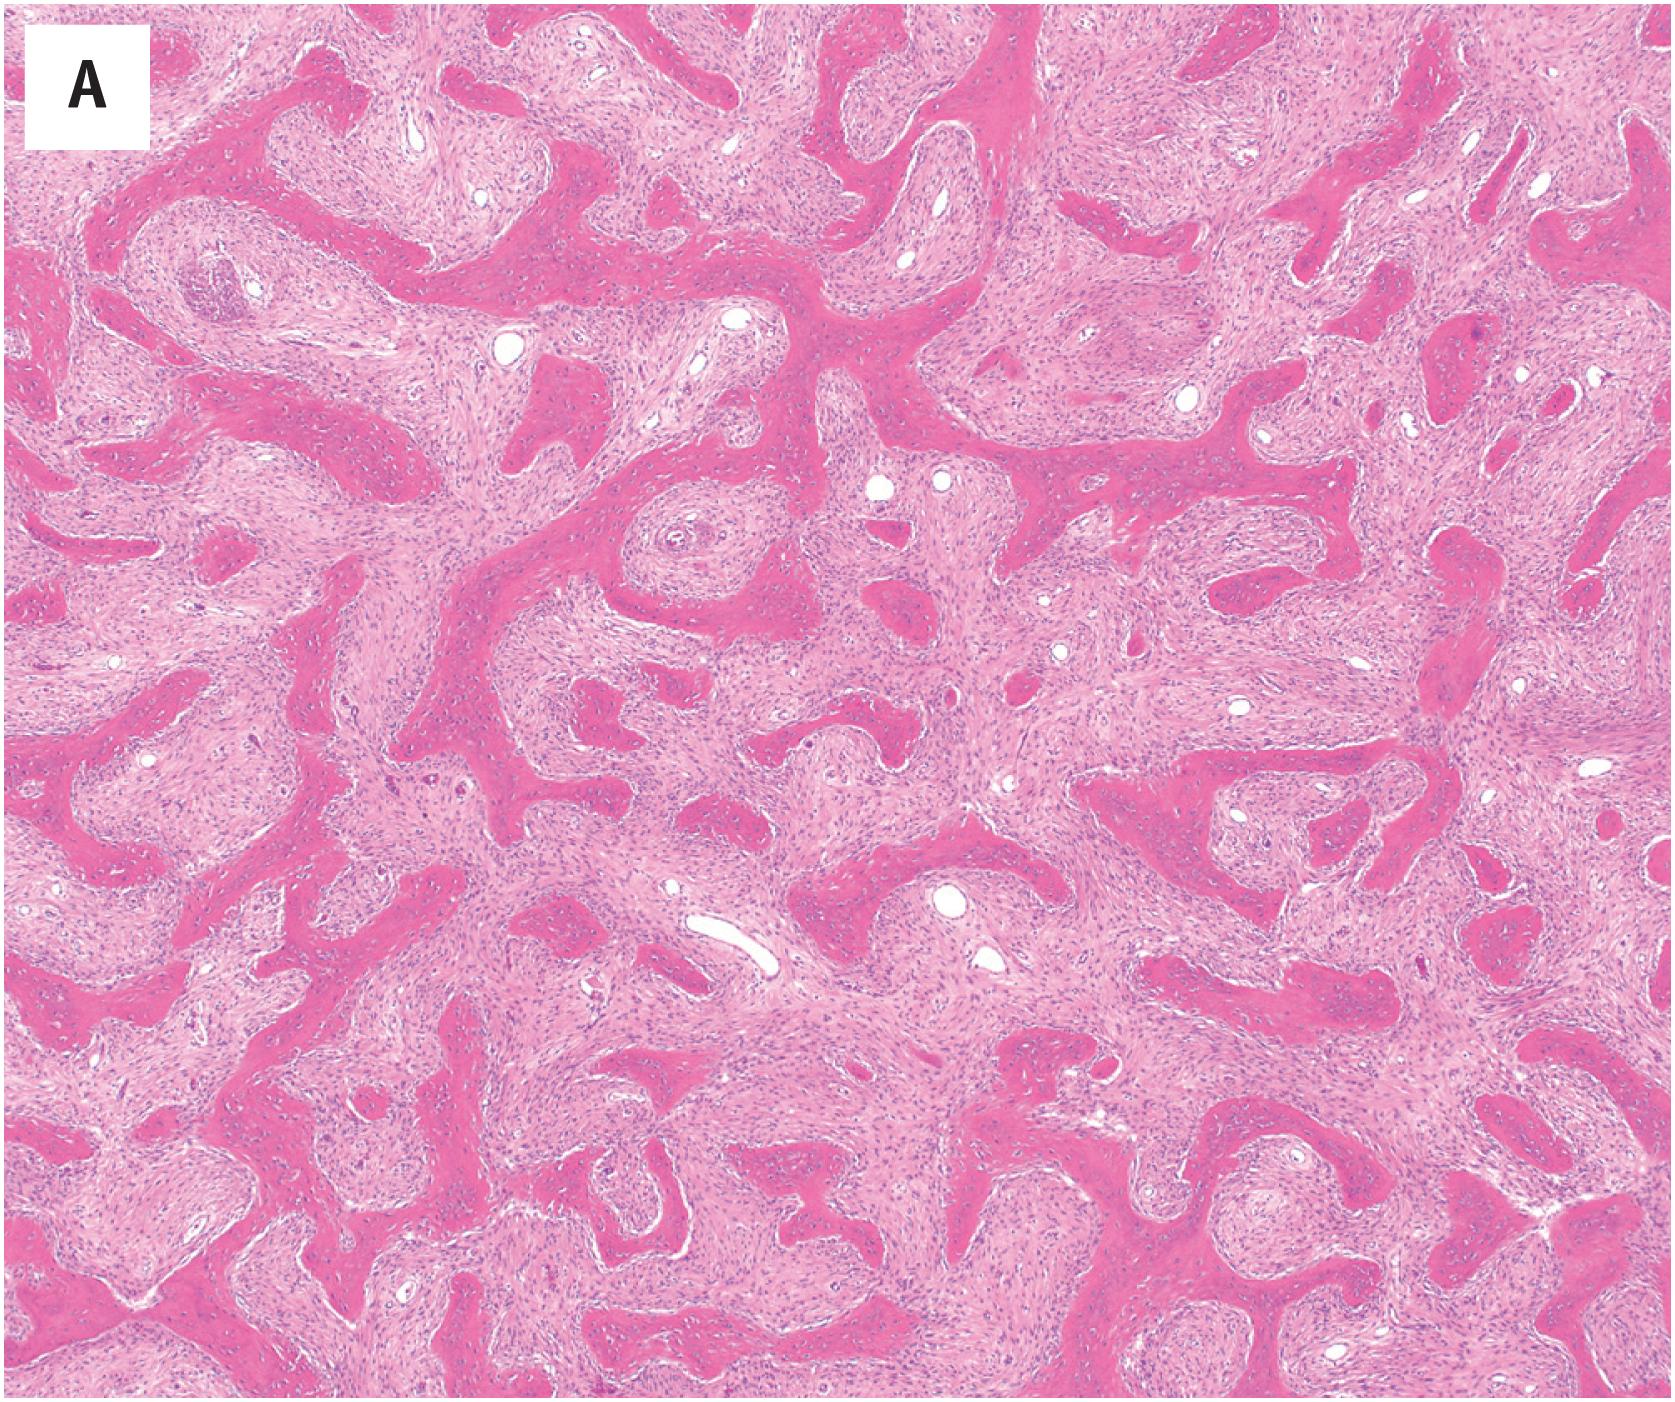 Fig. 24.3, Classic fibrous dysplasia comprised of spicules of woven bone, arranged in an alphabet-like pattern and emanating from a bland-appearing fibrous stroma (A). Higher power shows that the woven bone does not have a prominent osteoblastic rimming. Numerous collagen fibers emanate from the bone into the surrounding cellular fibrous stroma (B). Occasionally, the stroma may appear more cellular and sometimes accompanied by hemorrhage and osteoclast-type giant cells similar to what is seen in a solid aneurysmal bone cyst (C).